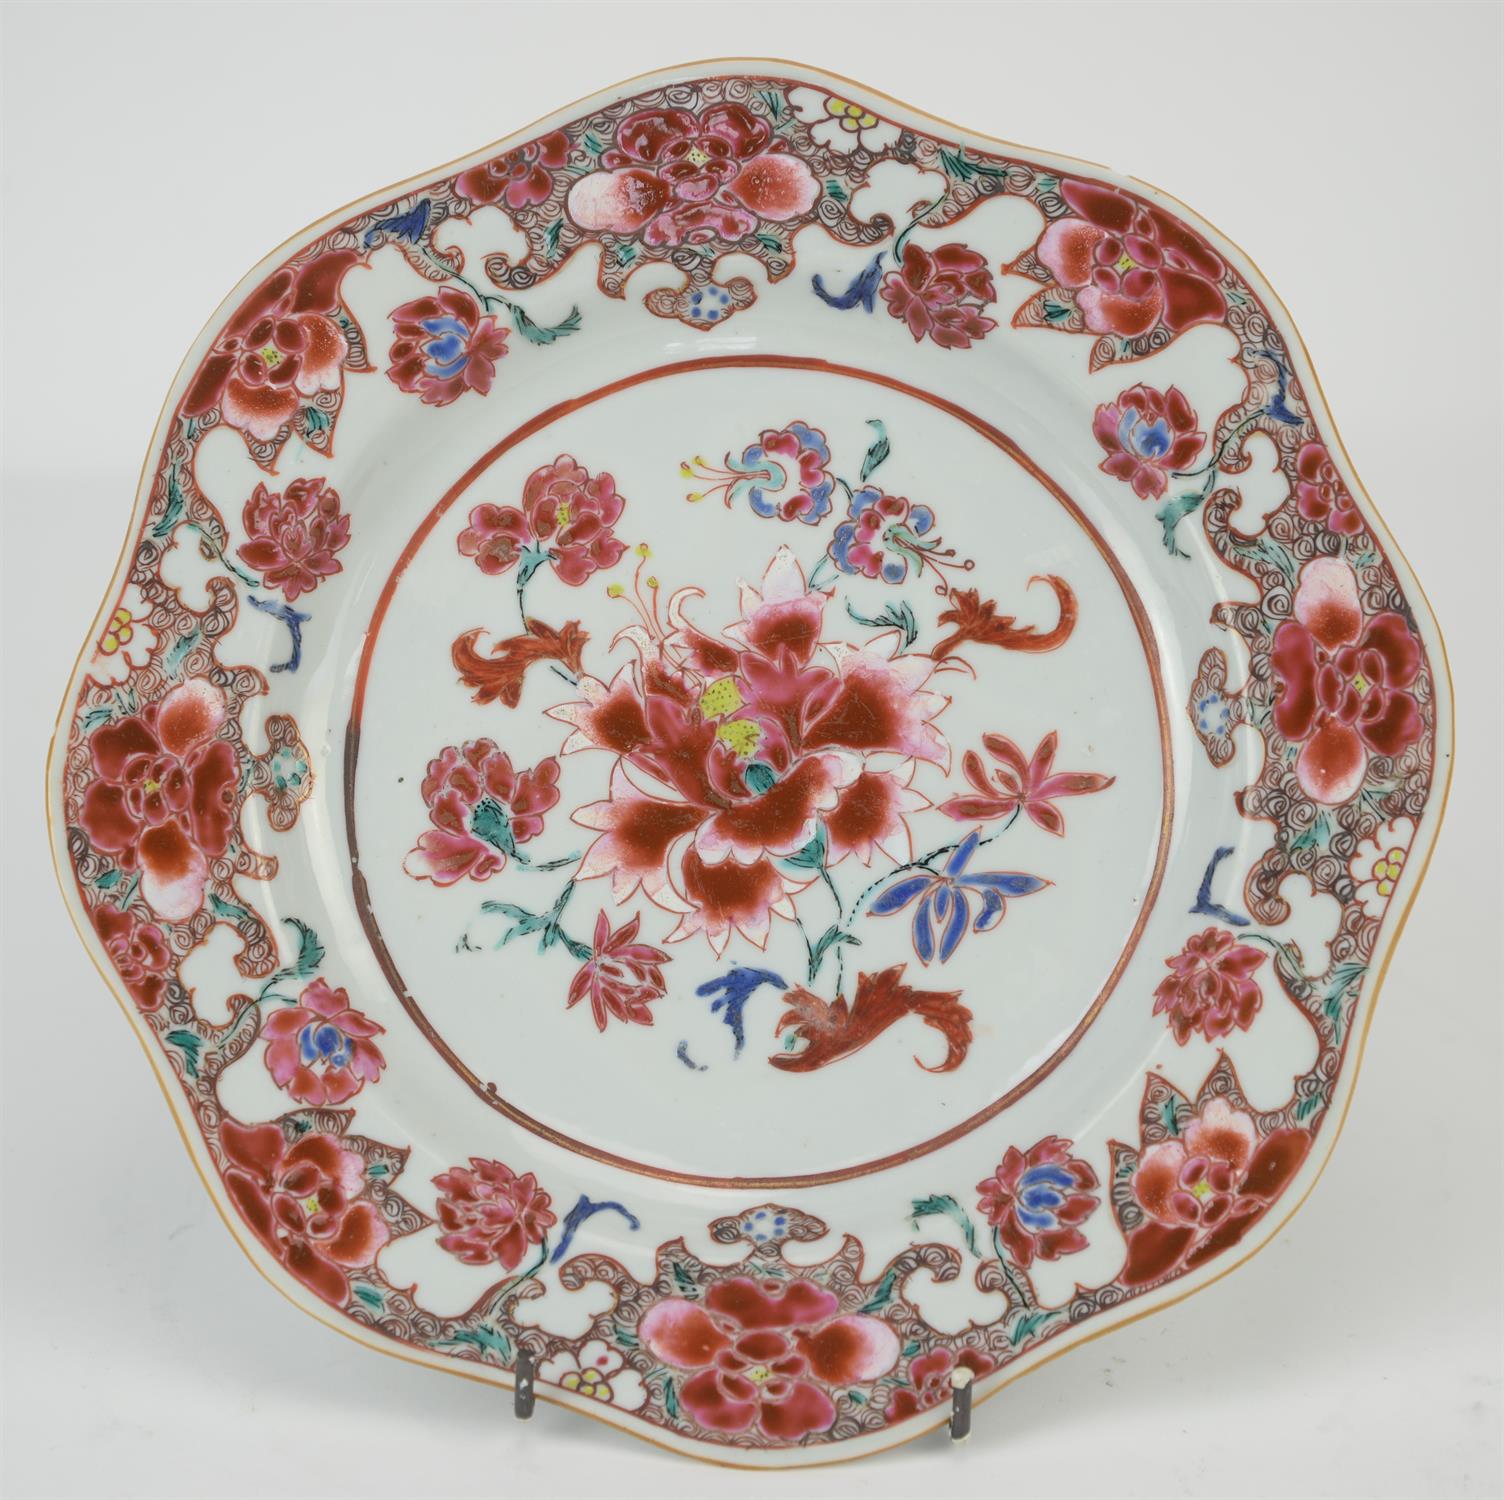 Eight famille rose dishes; each one decorated with floral designs and about 22.5 cm diameter, - Image 23 of 28